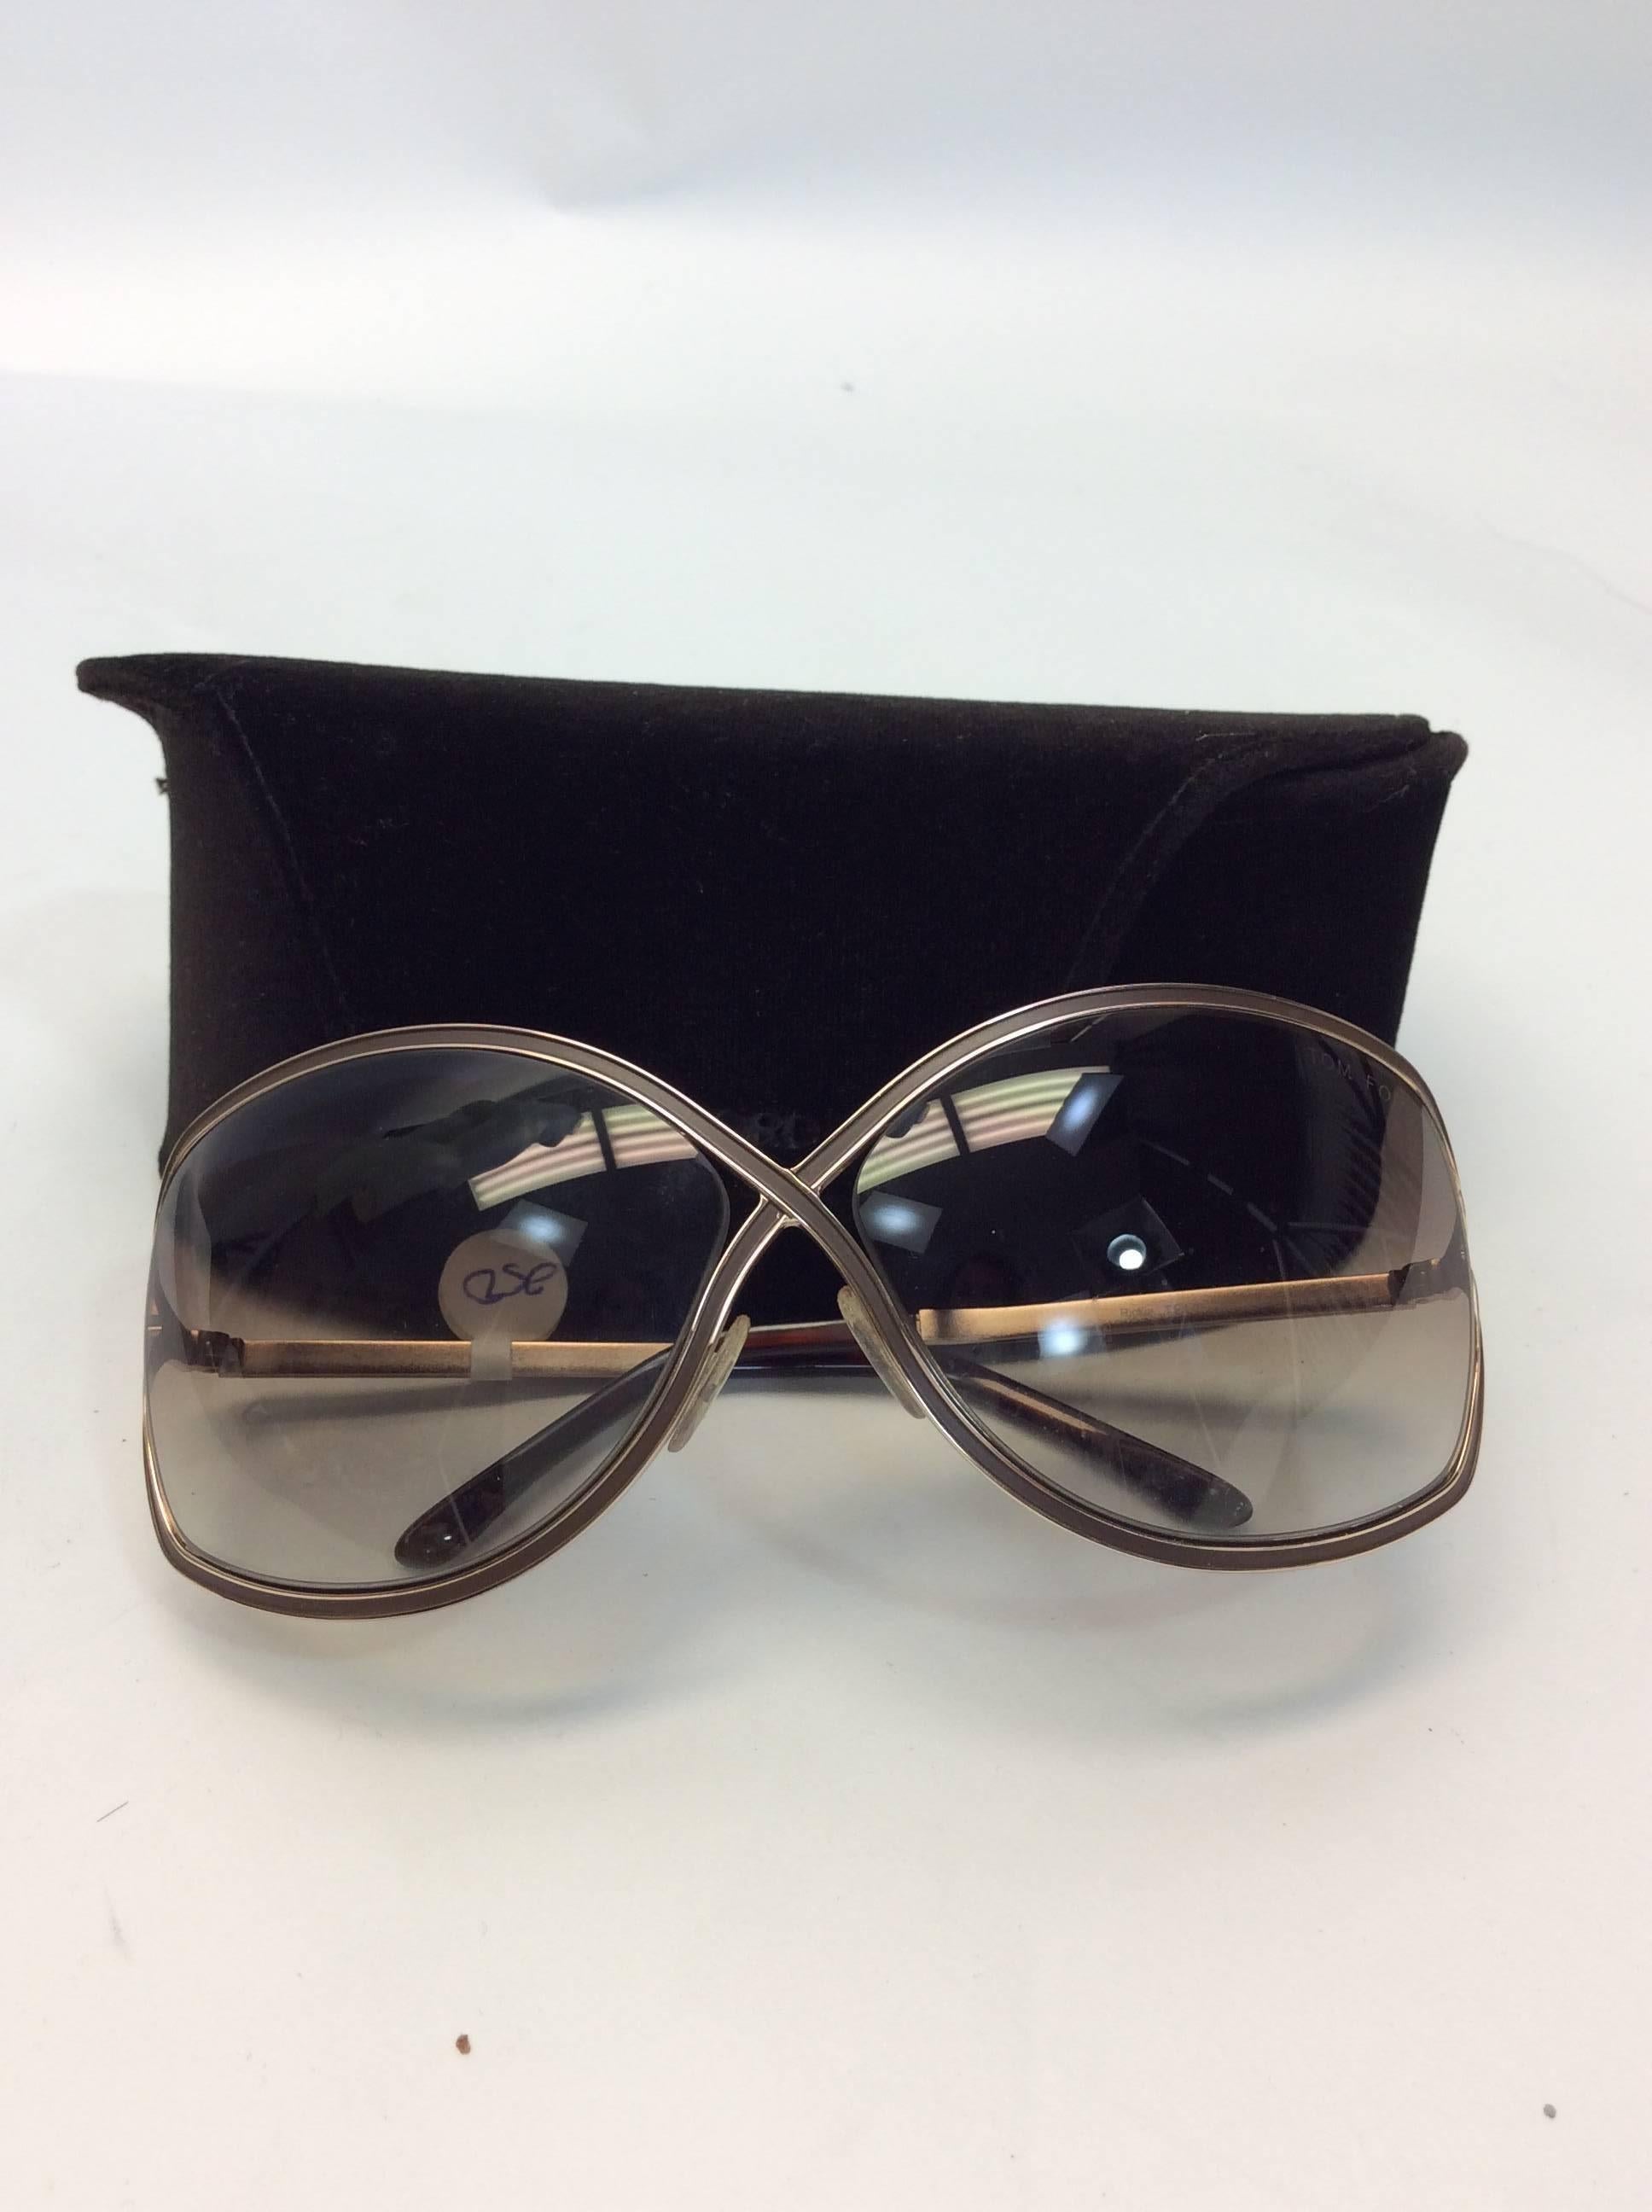 Tom Ford Oversized Soft Round Sunglasses
Oversized soft round plastic sunglasses 
Cutaway lenses
$250
Made in Italy
